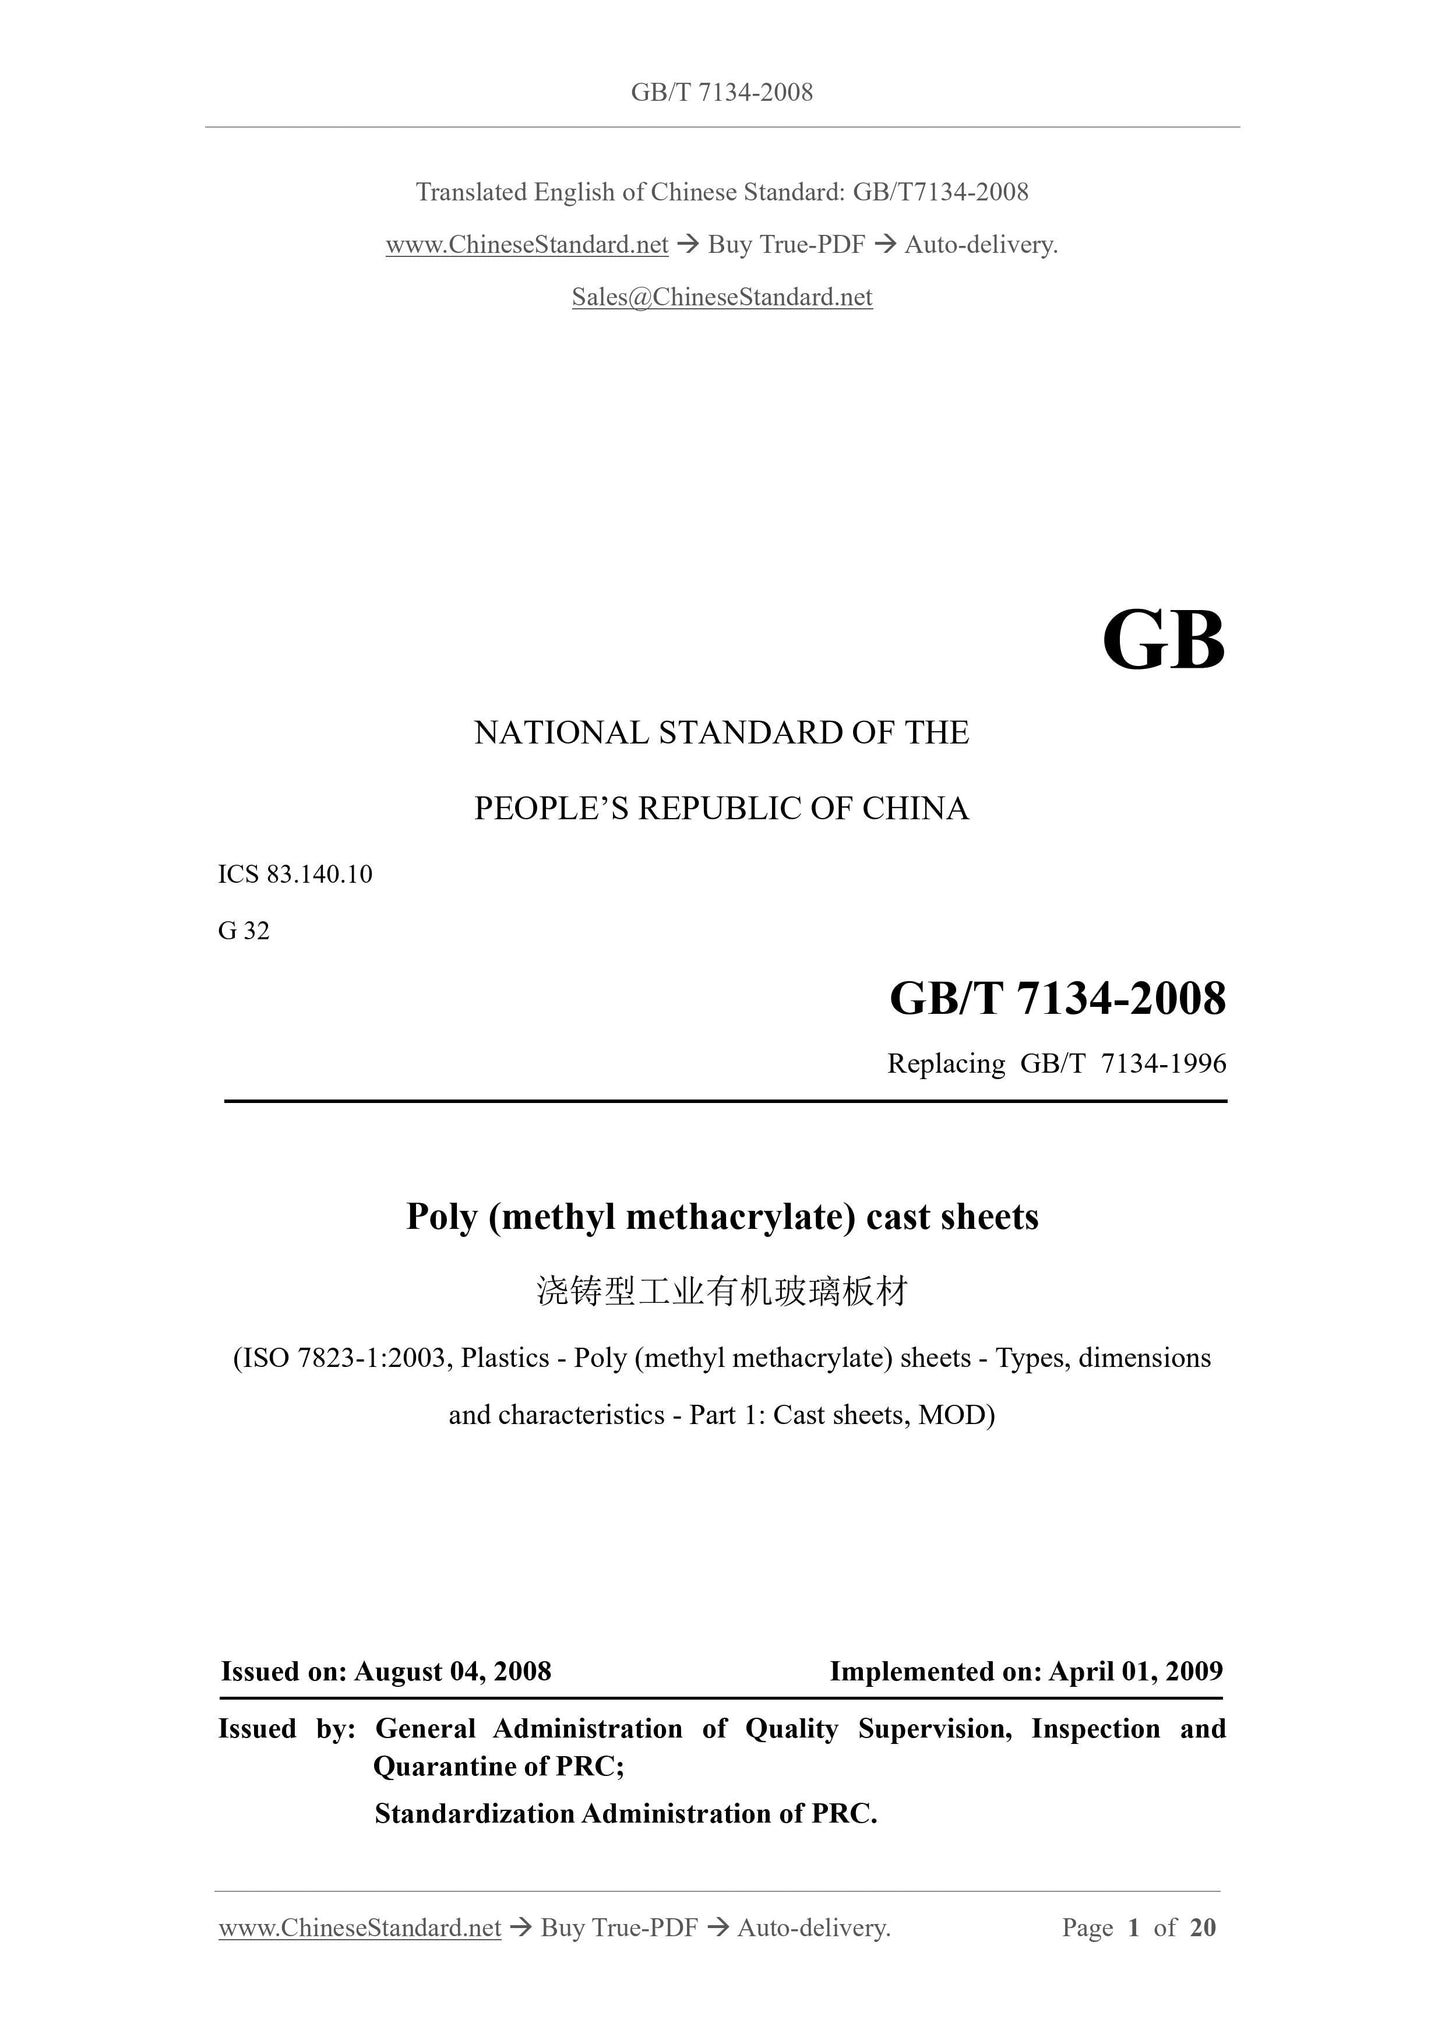 GB/T 7134-2008 Page 1